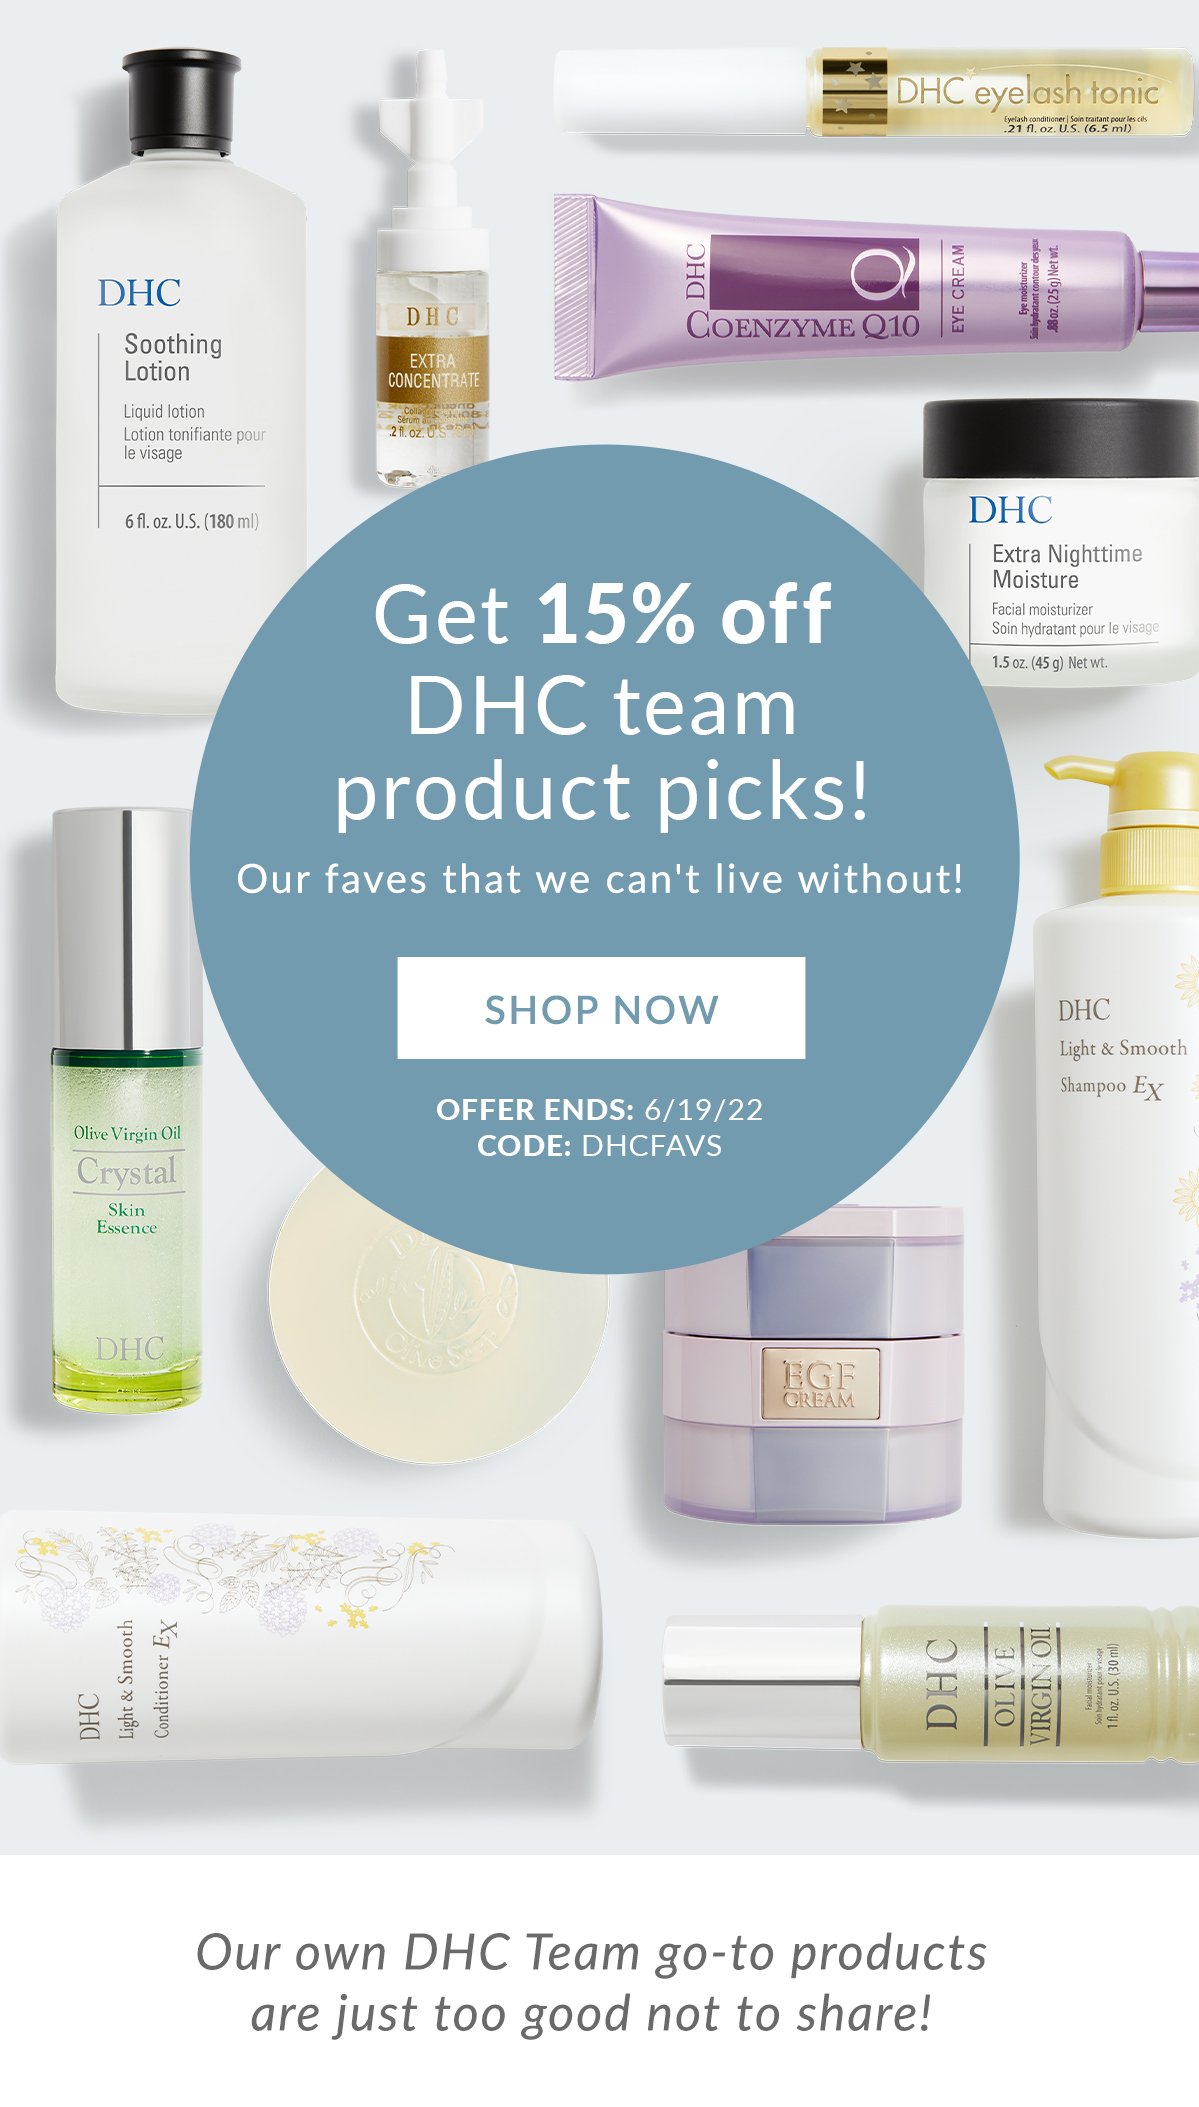 Get 15% off DHC team product picks!